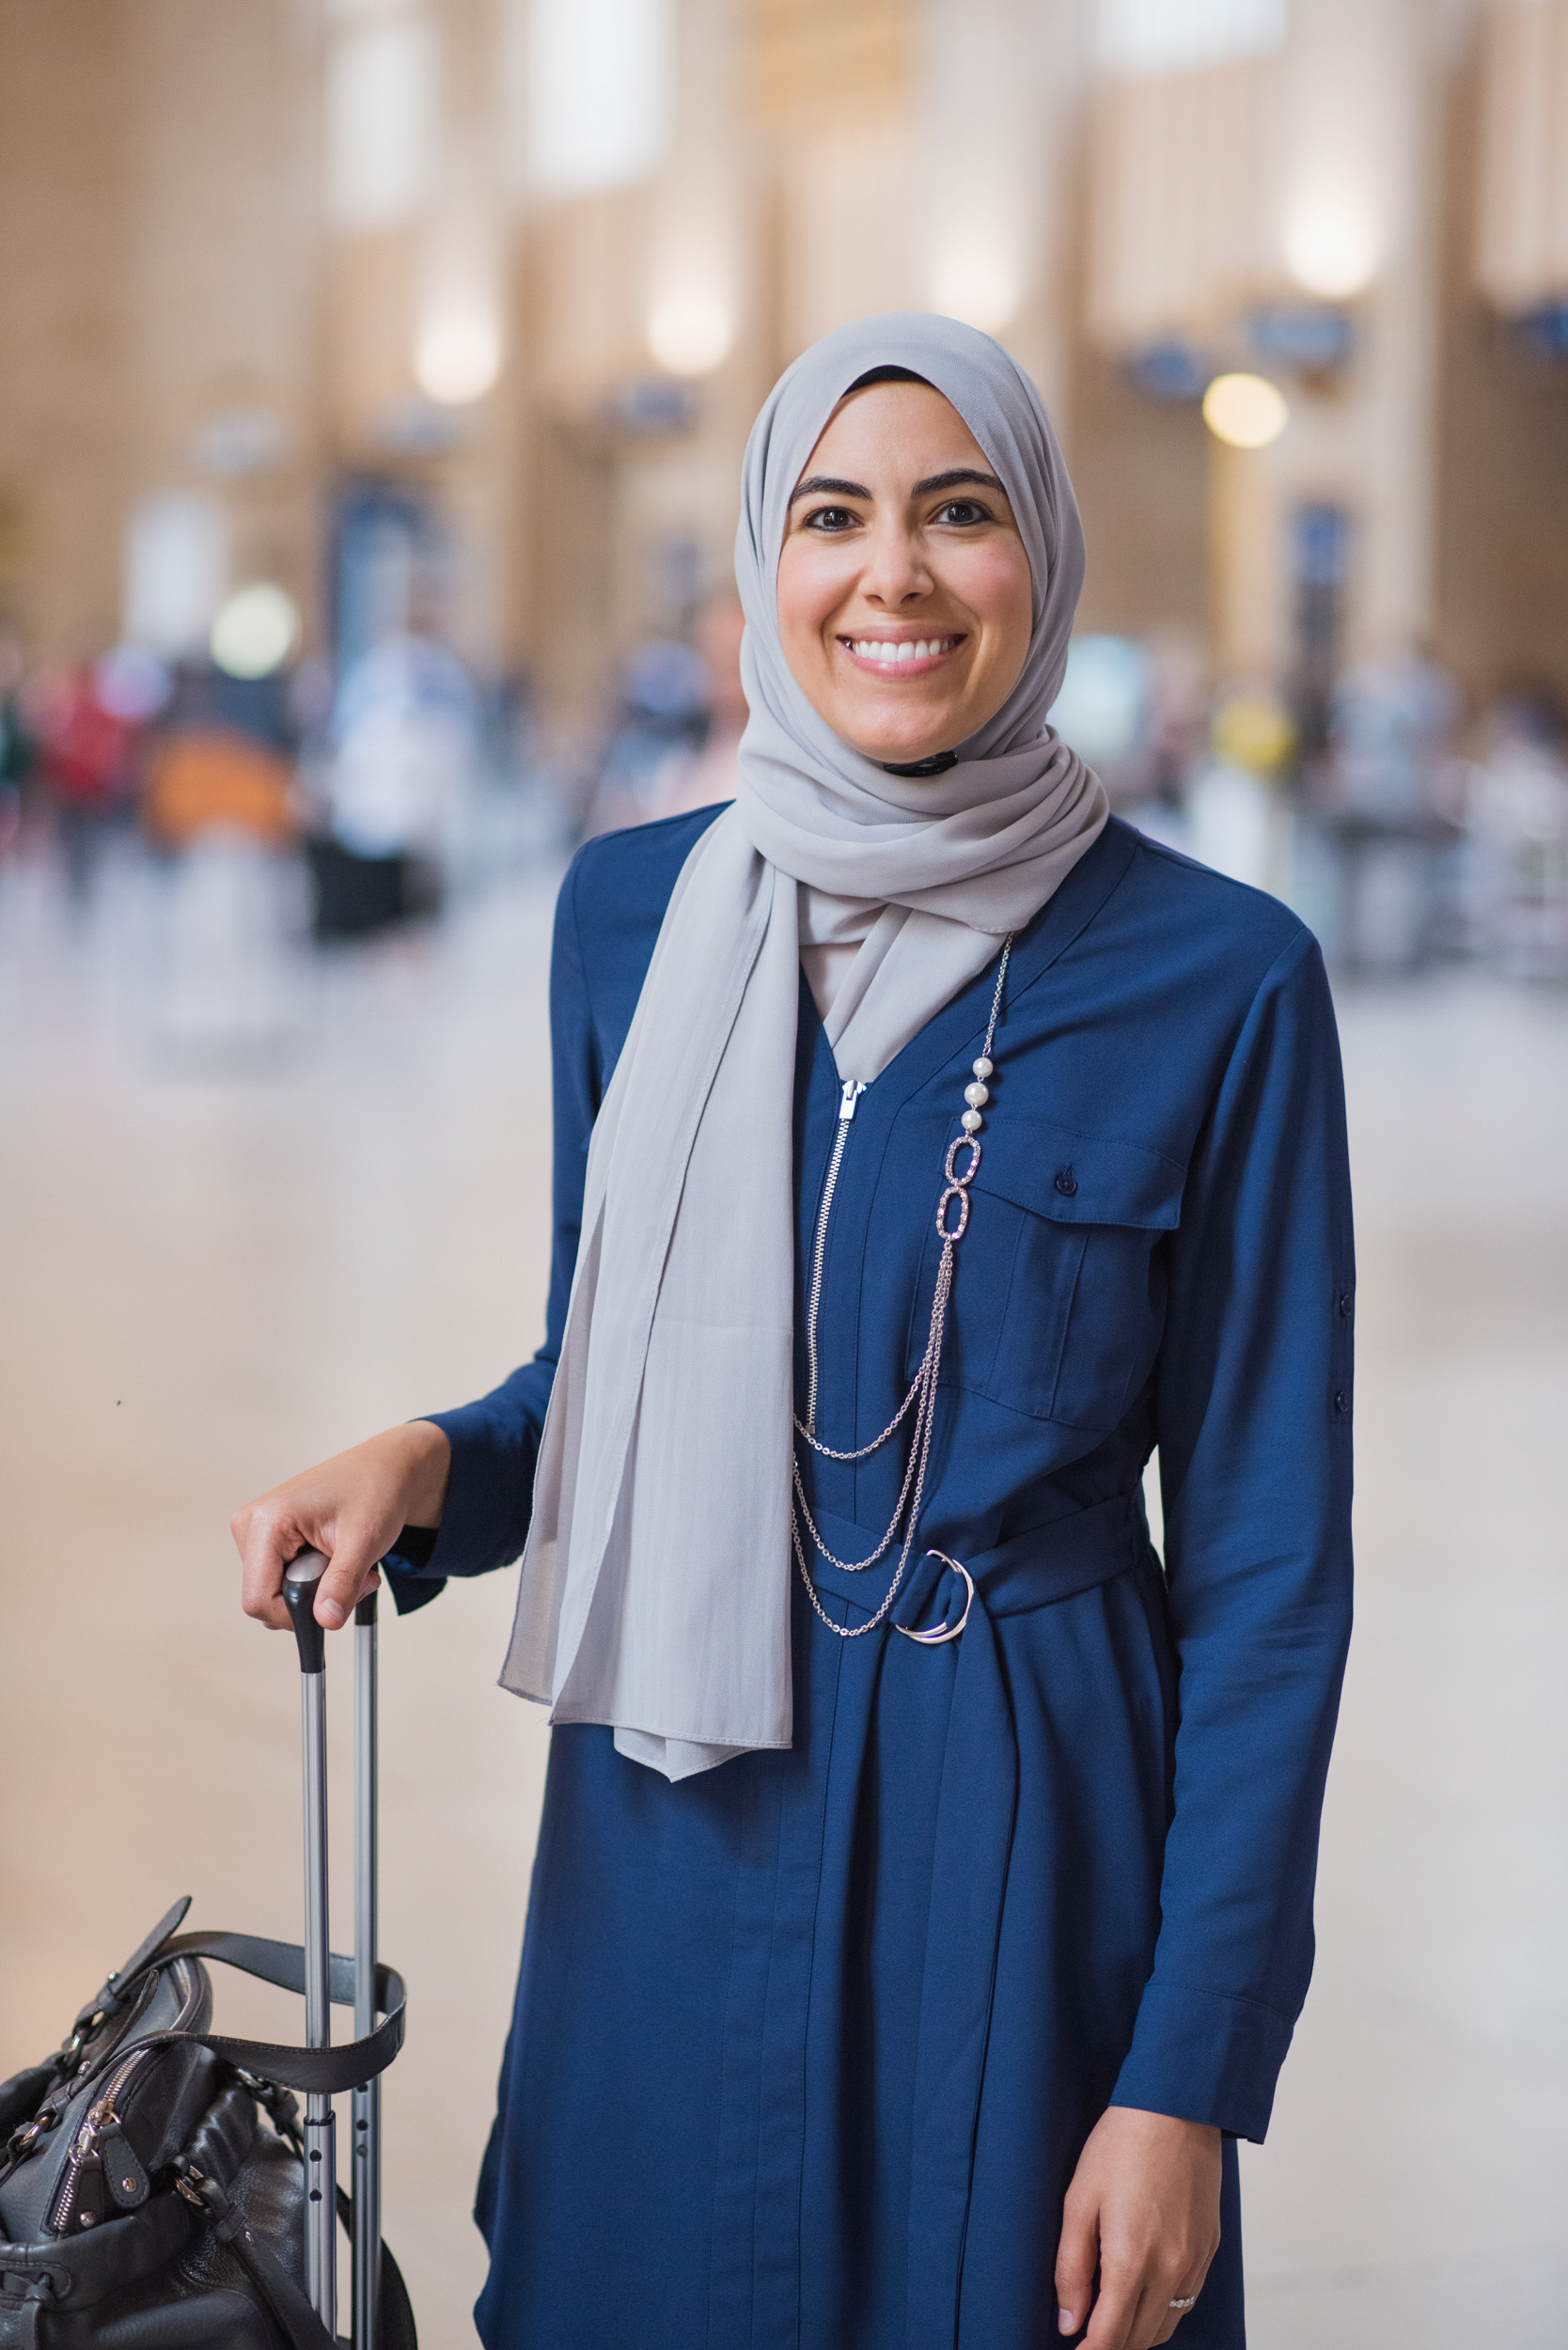 A-PASSENGER-POSES-WITH-HER-SUITCASE-FOR-THE-AMTRAK-MAGAZINE-THE-NATIONAL-IN-PHILADELPHIA-TRAIN-STATION